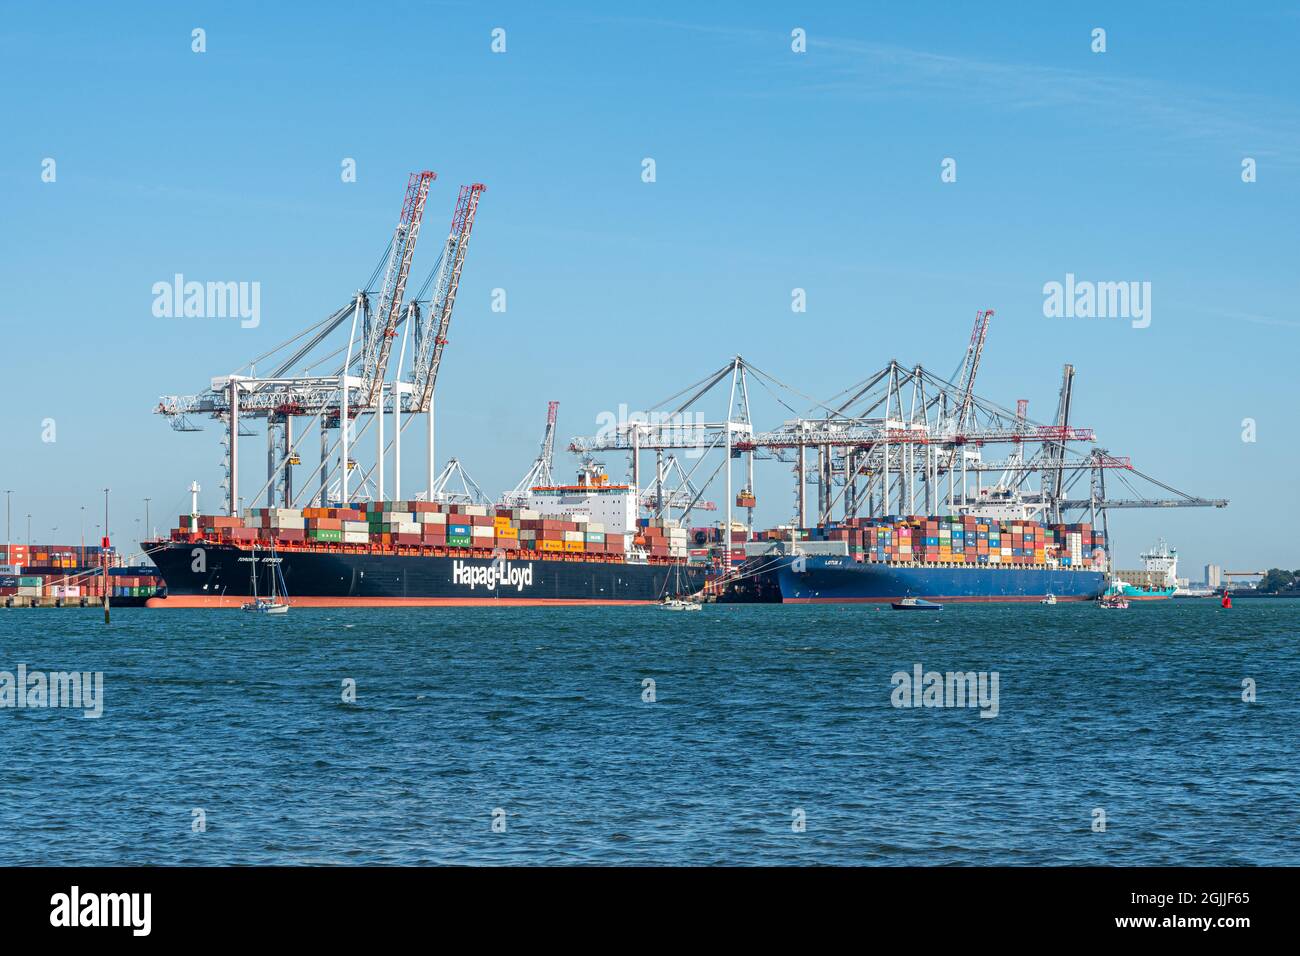 Port of Southampton (Southampton docks) in Hampshire, England, UK. View of two ships in the cargo port or container terminal. Stock Photo